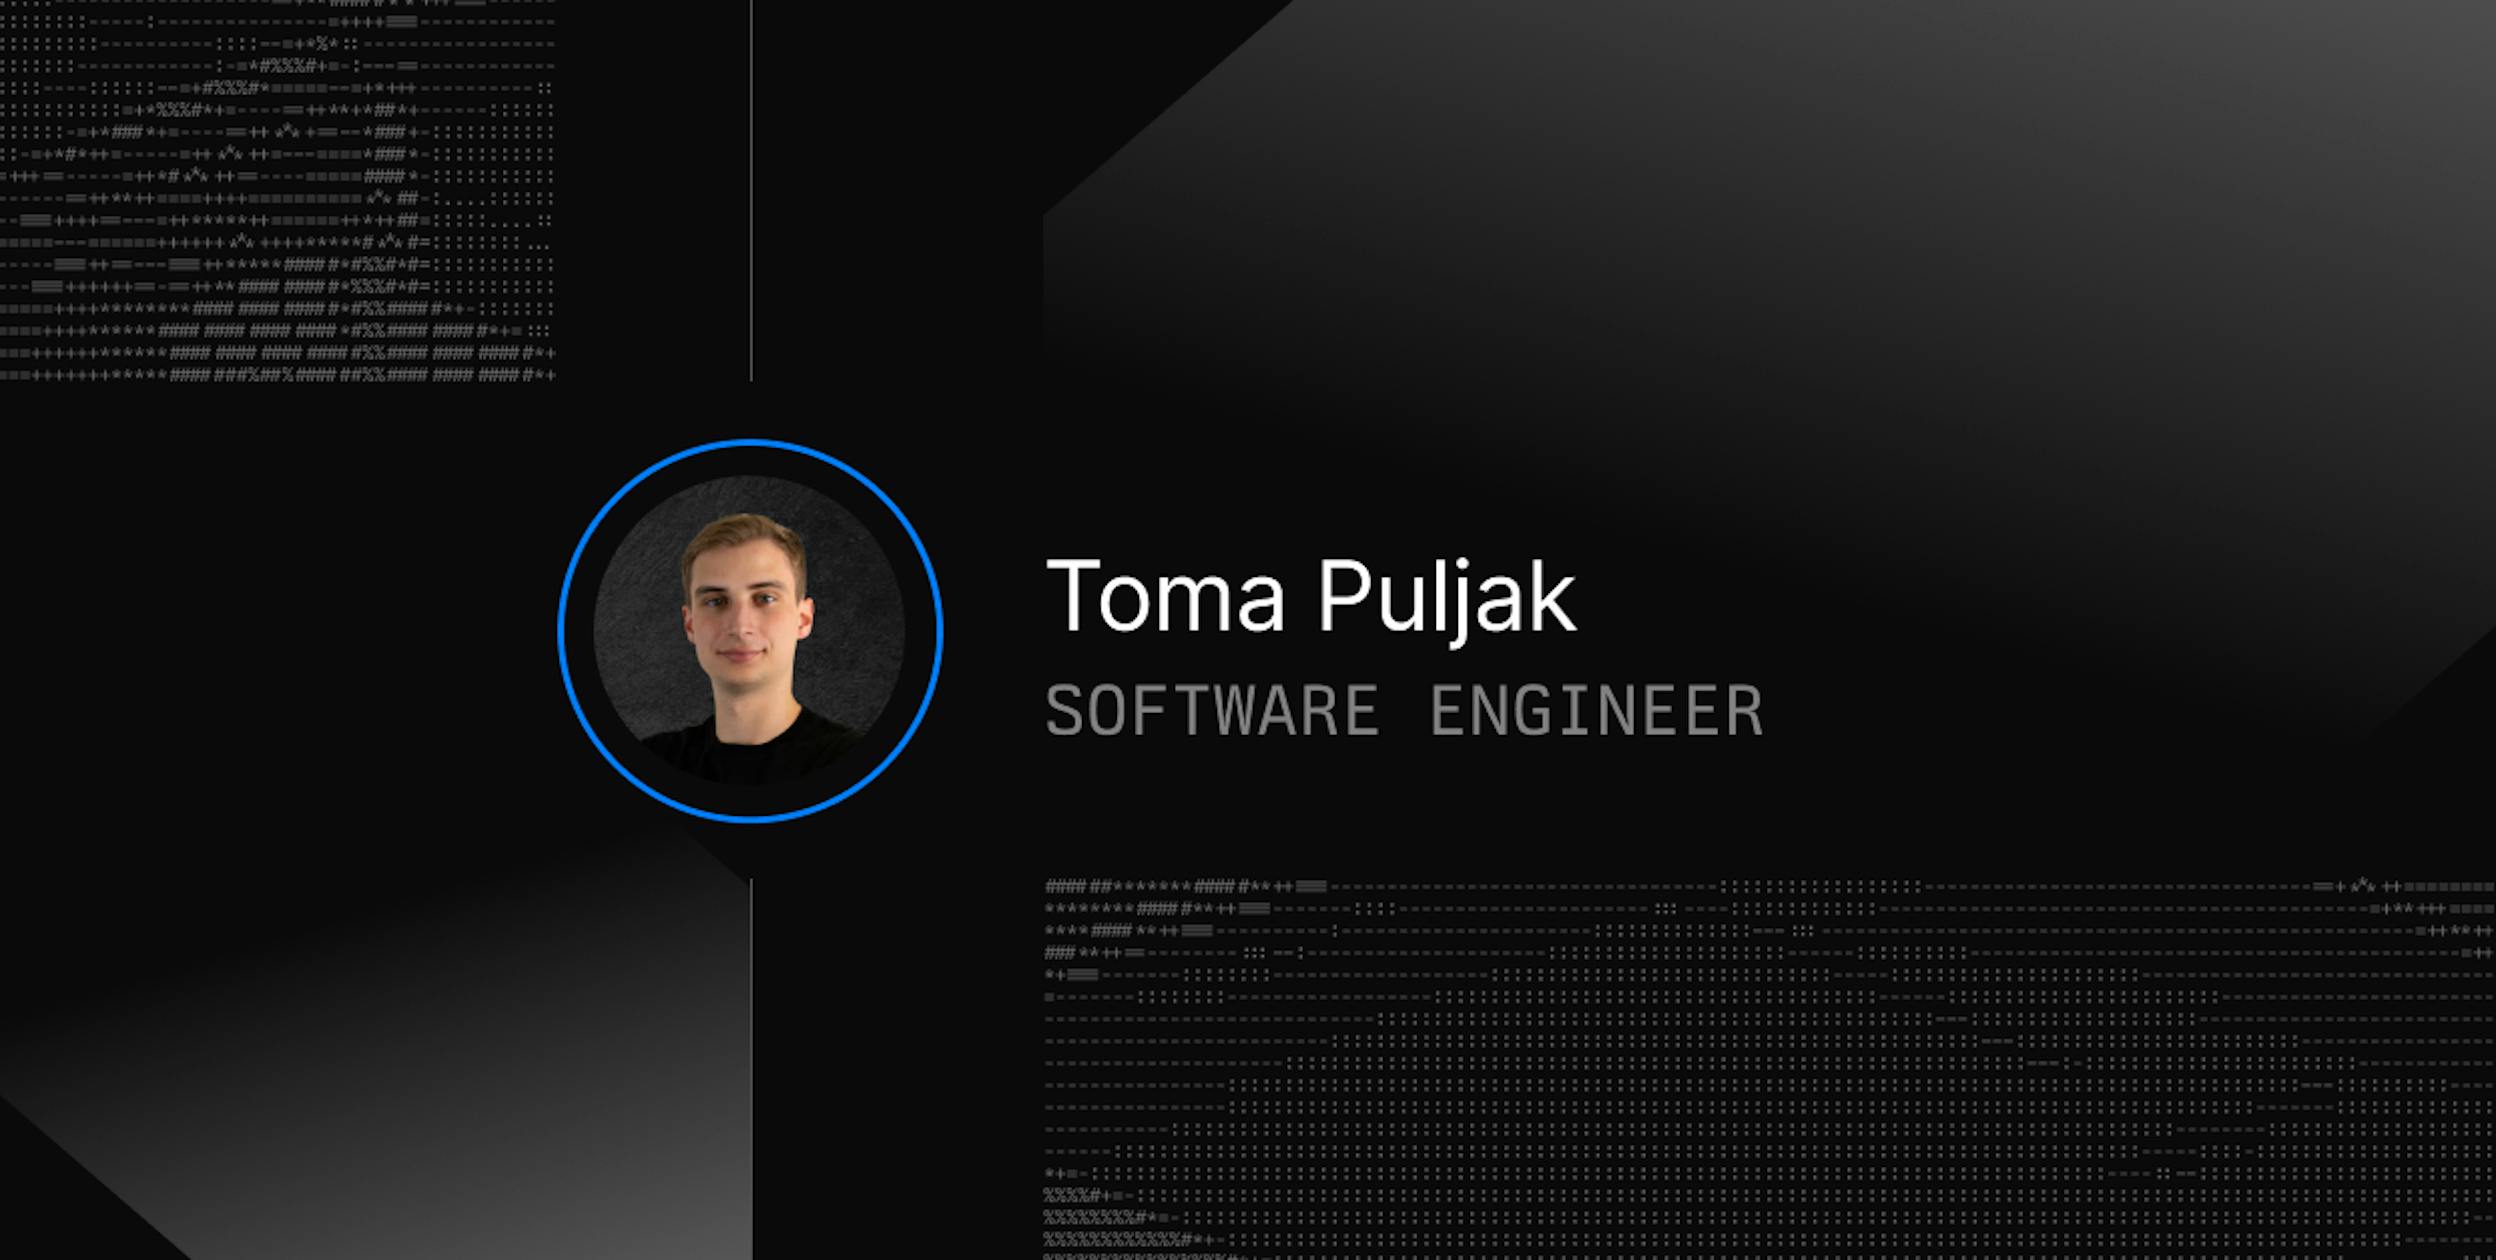 Meet Toma Puljak, Our Engineer and Passionate Advocate